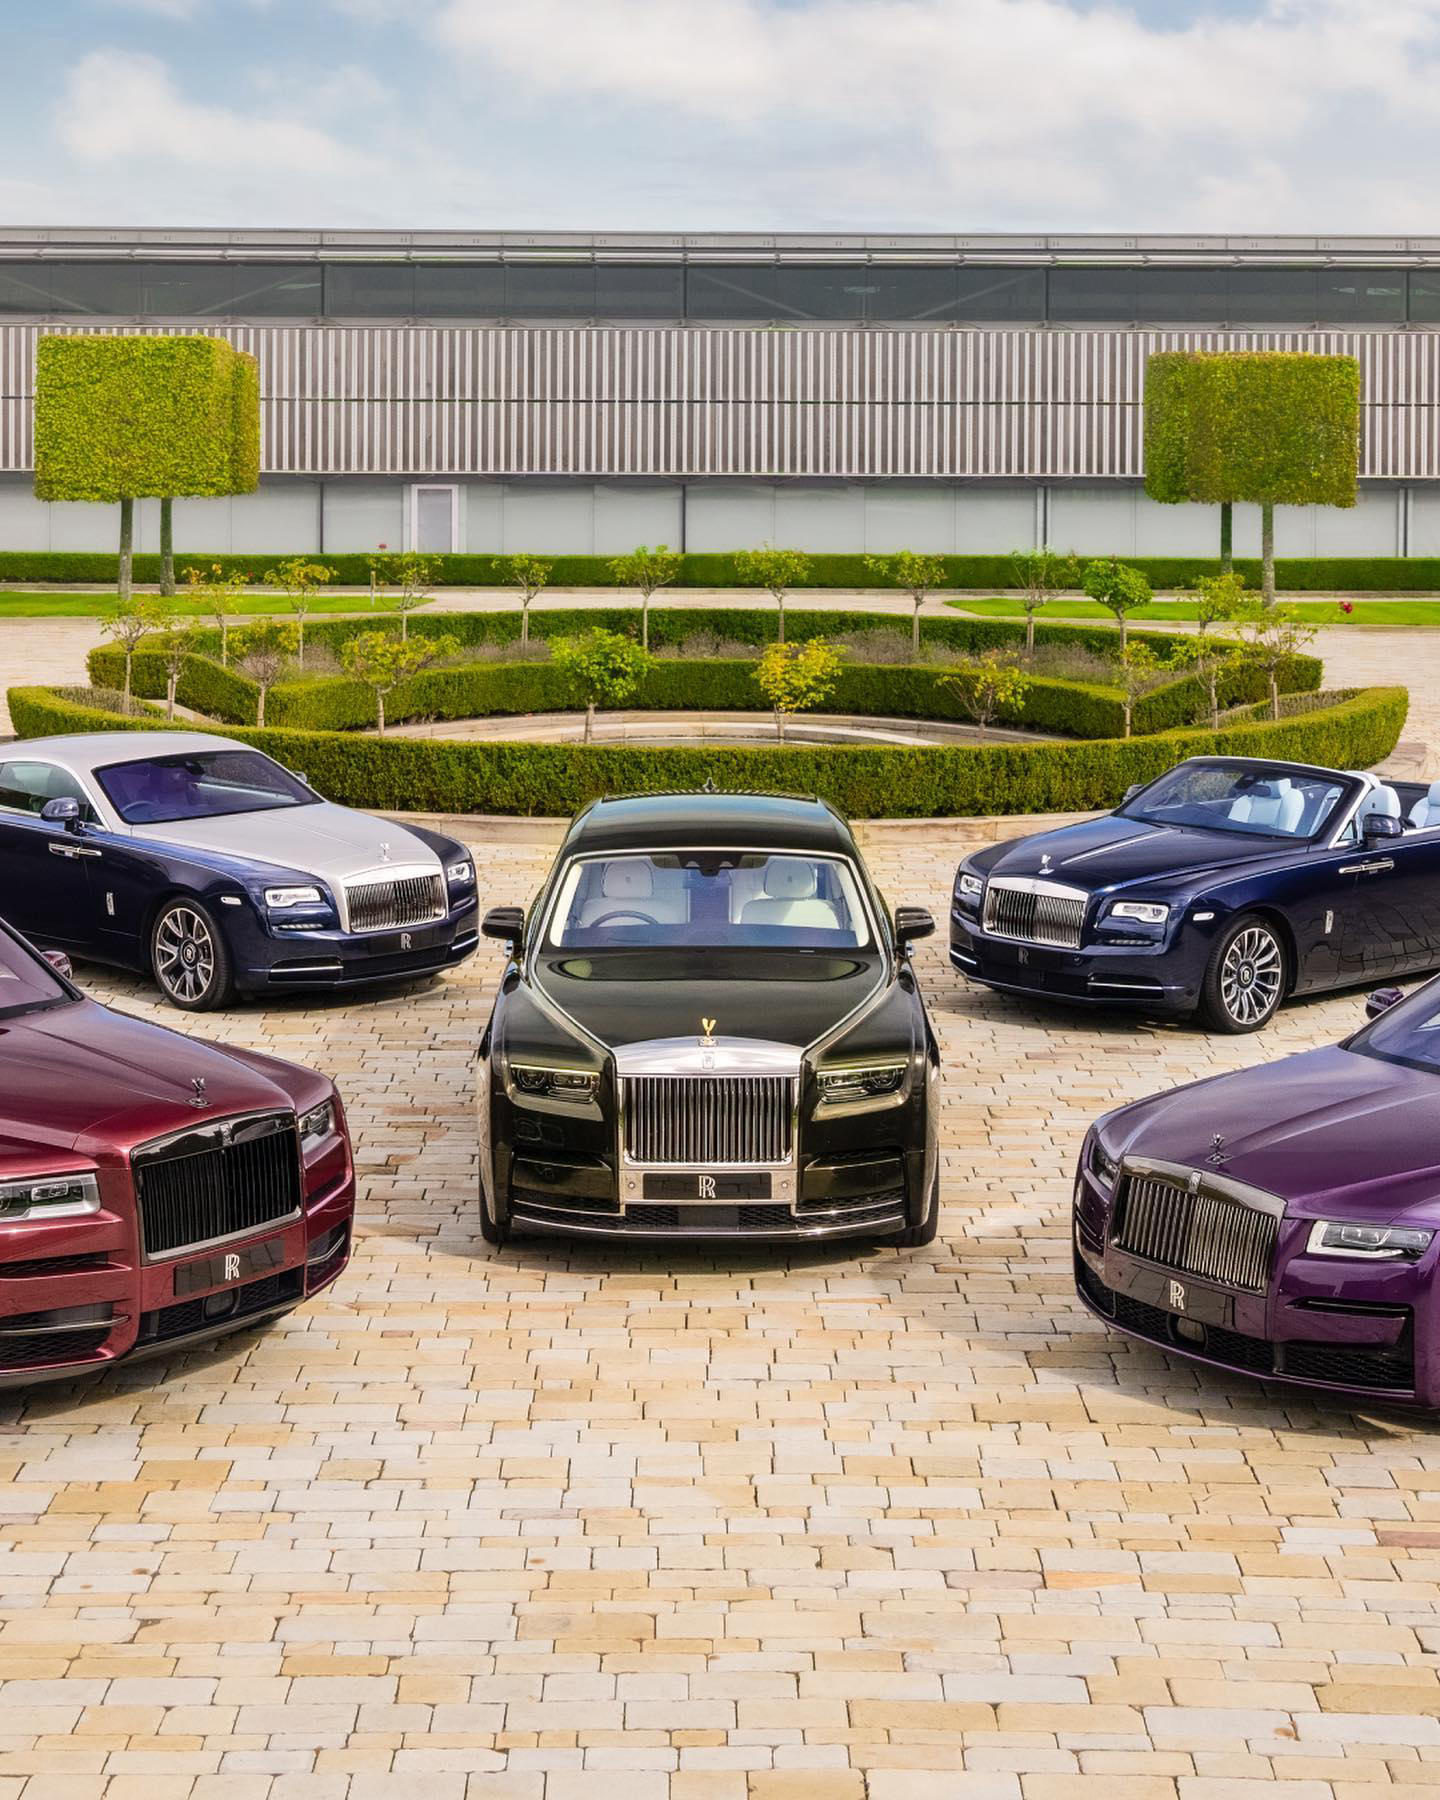 This month marks our 20th year of production at the Home of Rolls-Royce at Goodwood, the only place